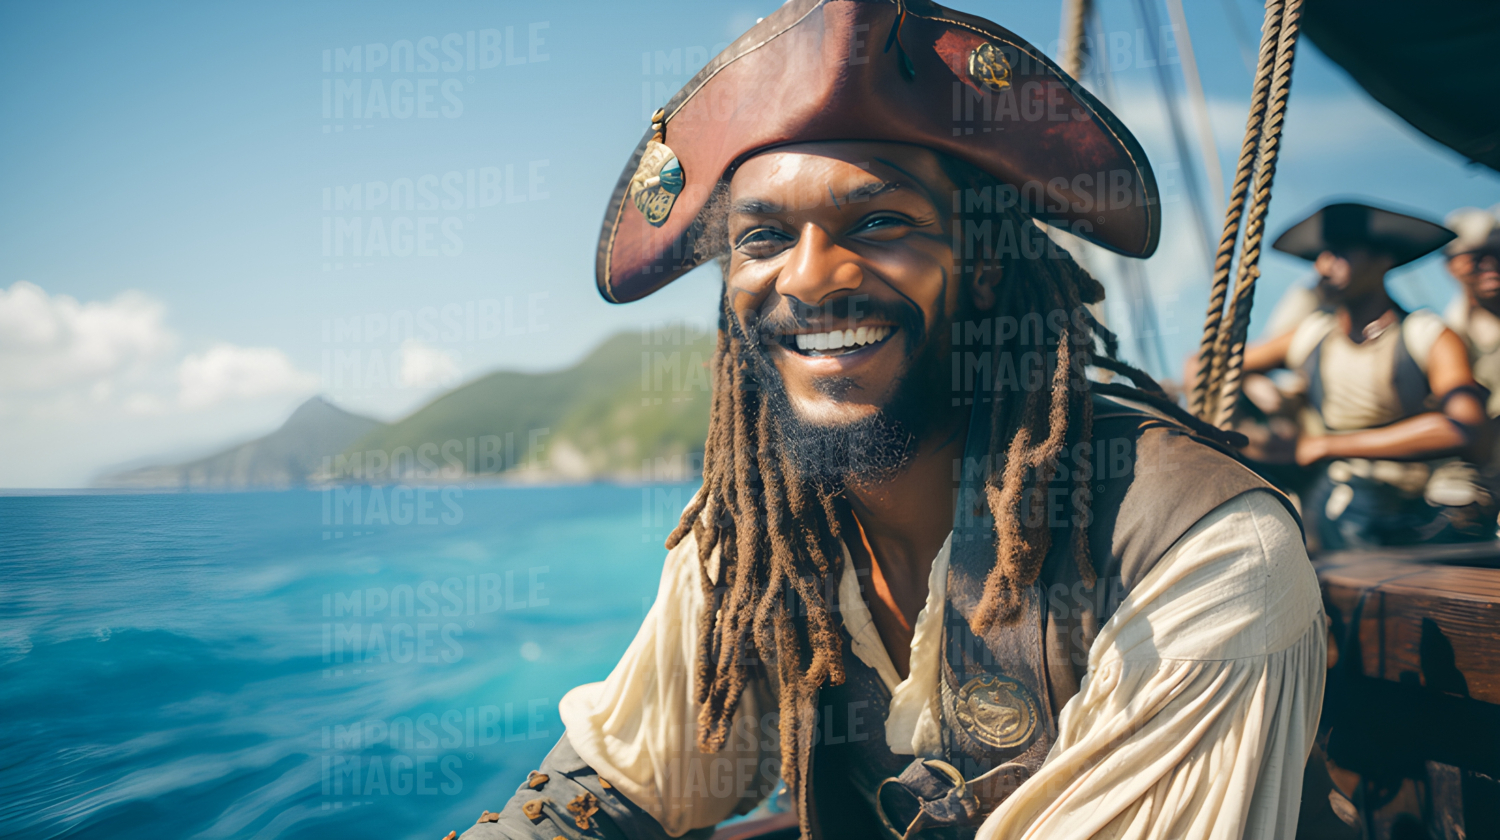 Smiling West Indian pirate aboard ship in the Caribbean